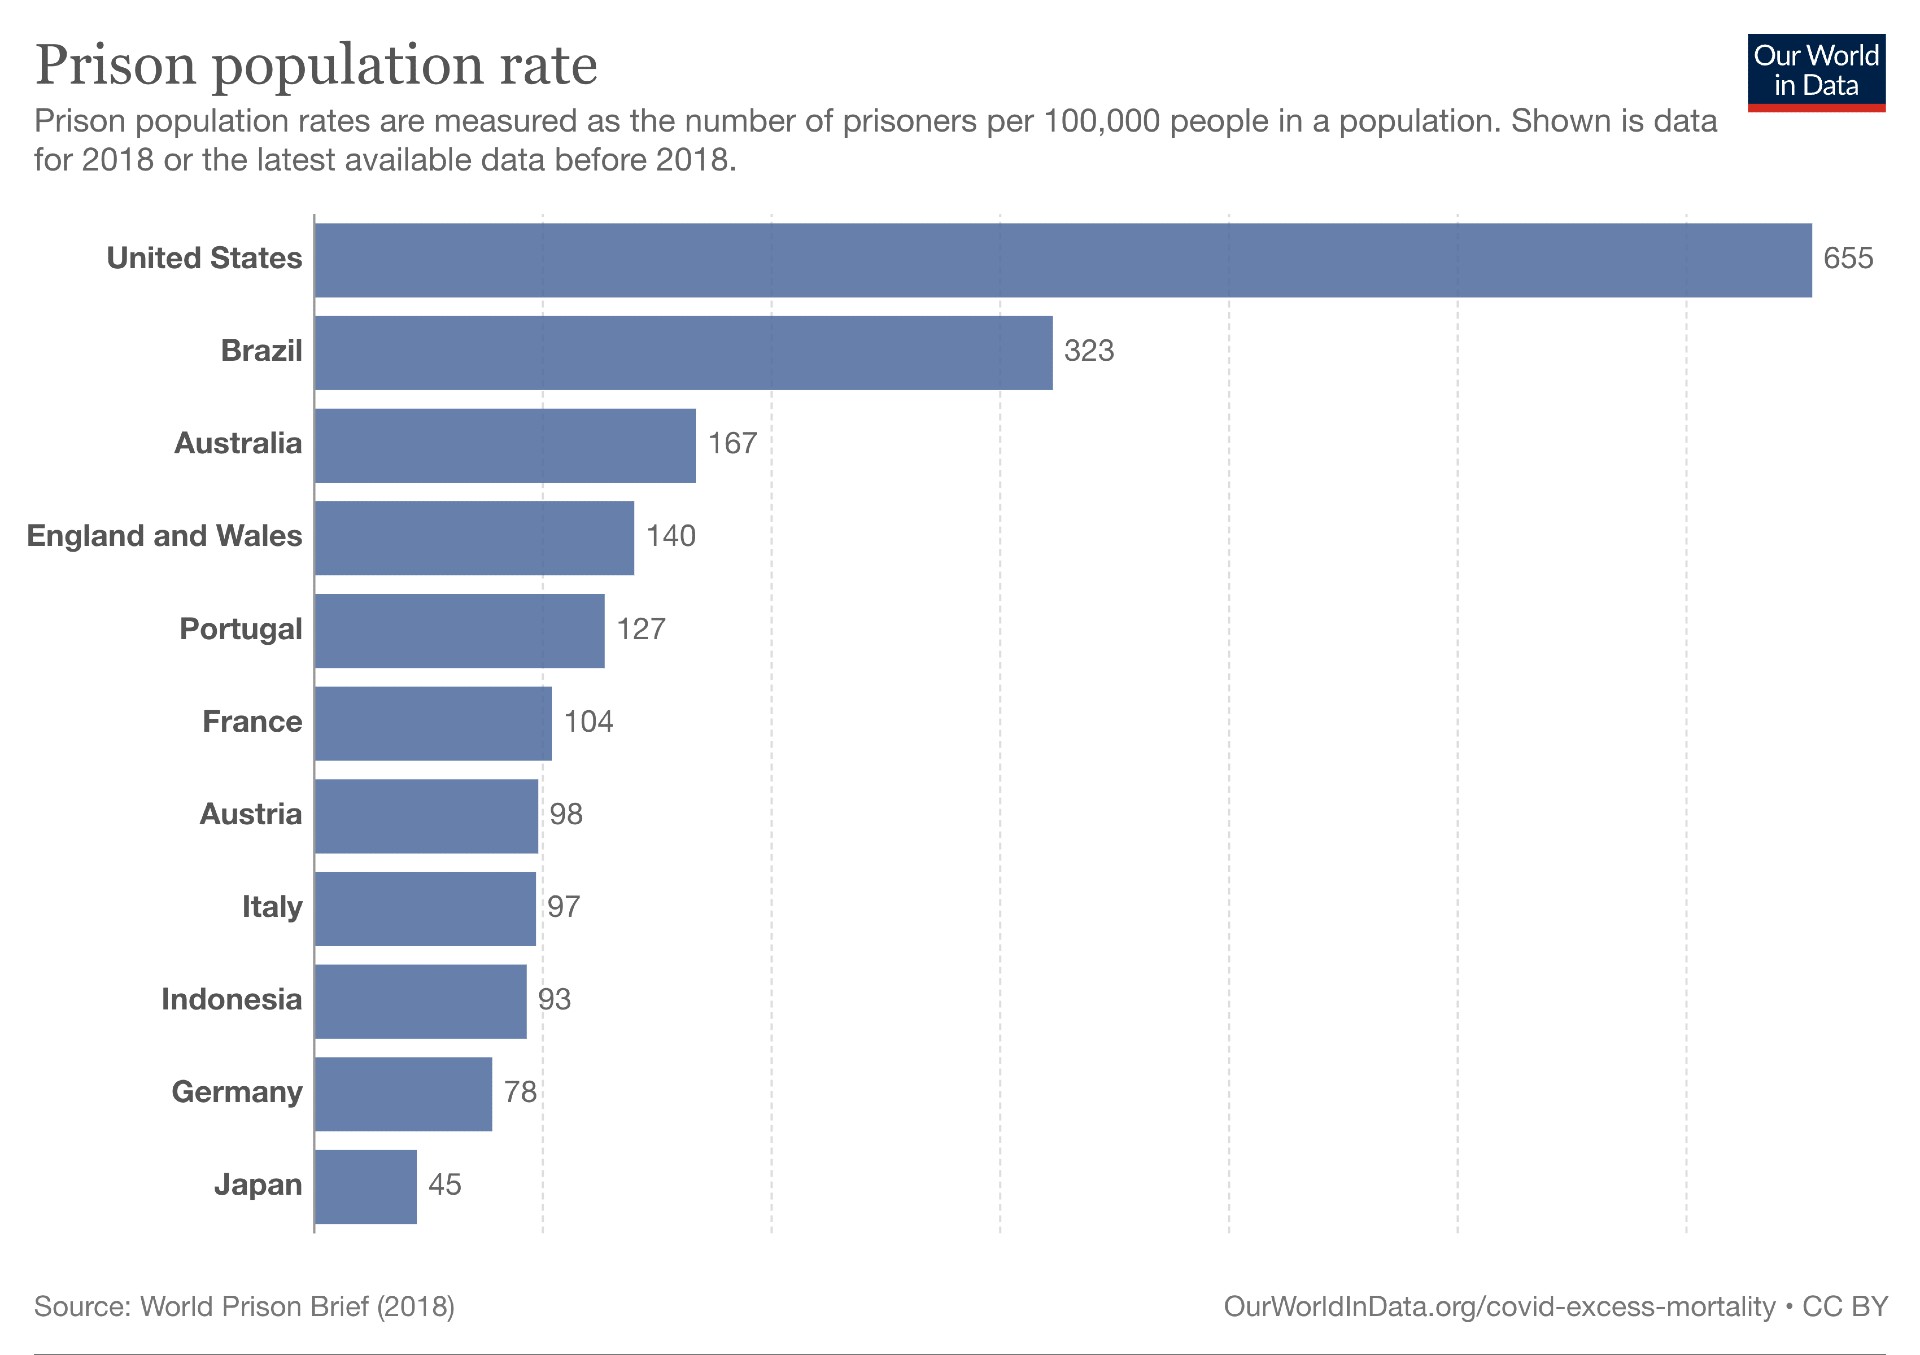 A bar chart showing prison populations for various countries.